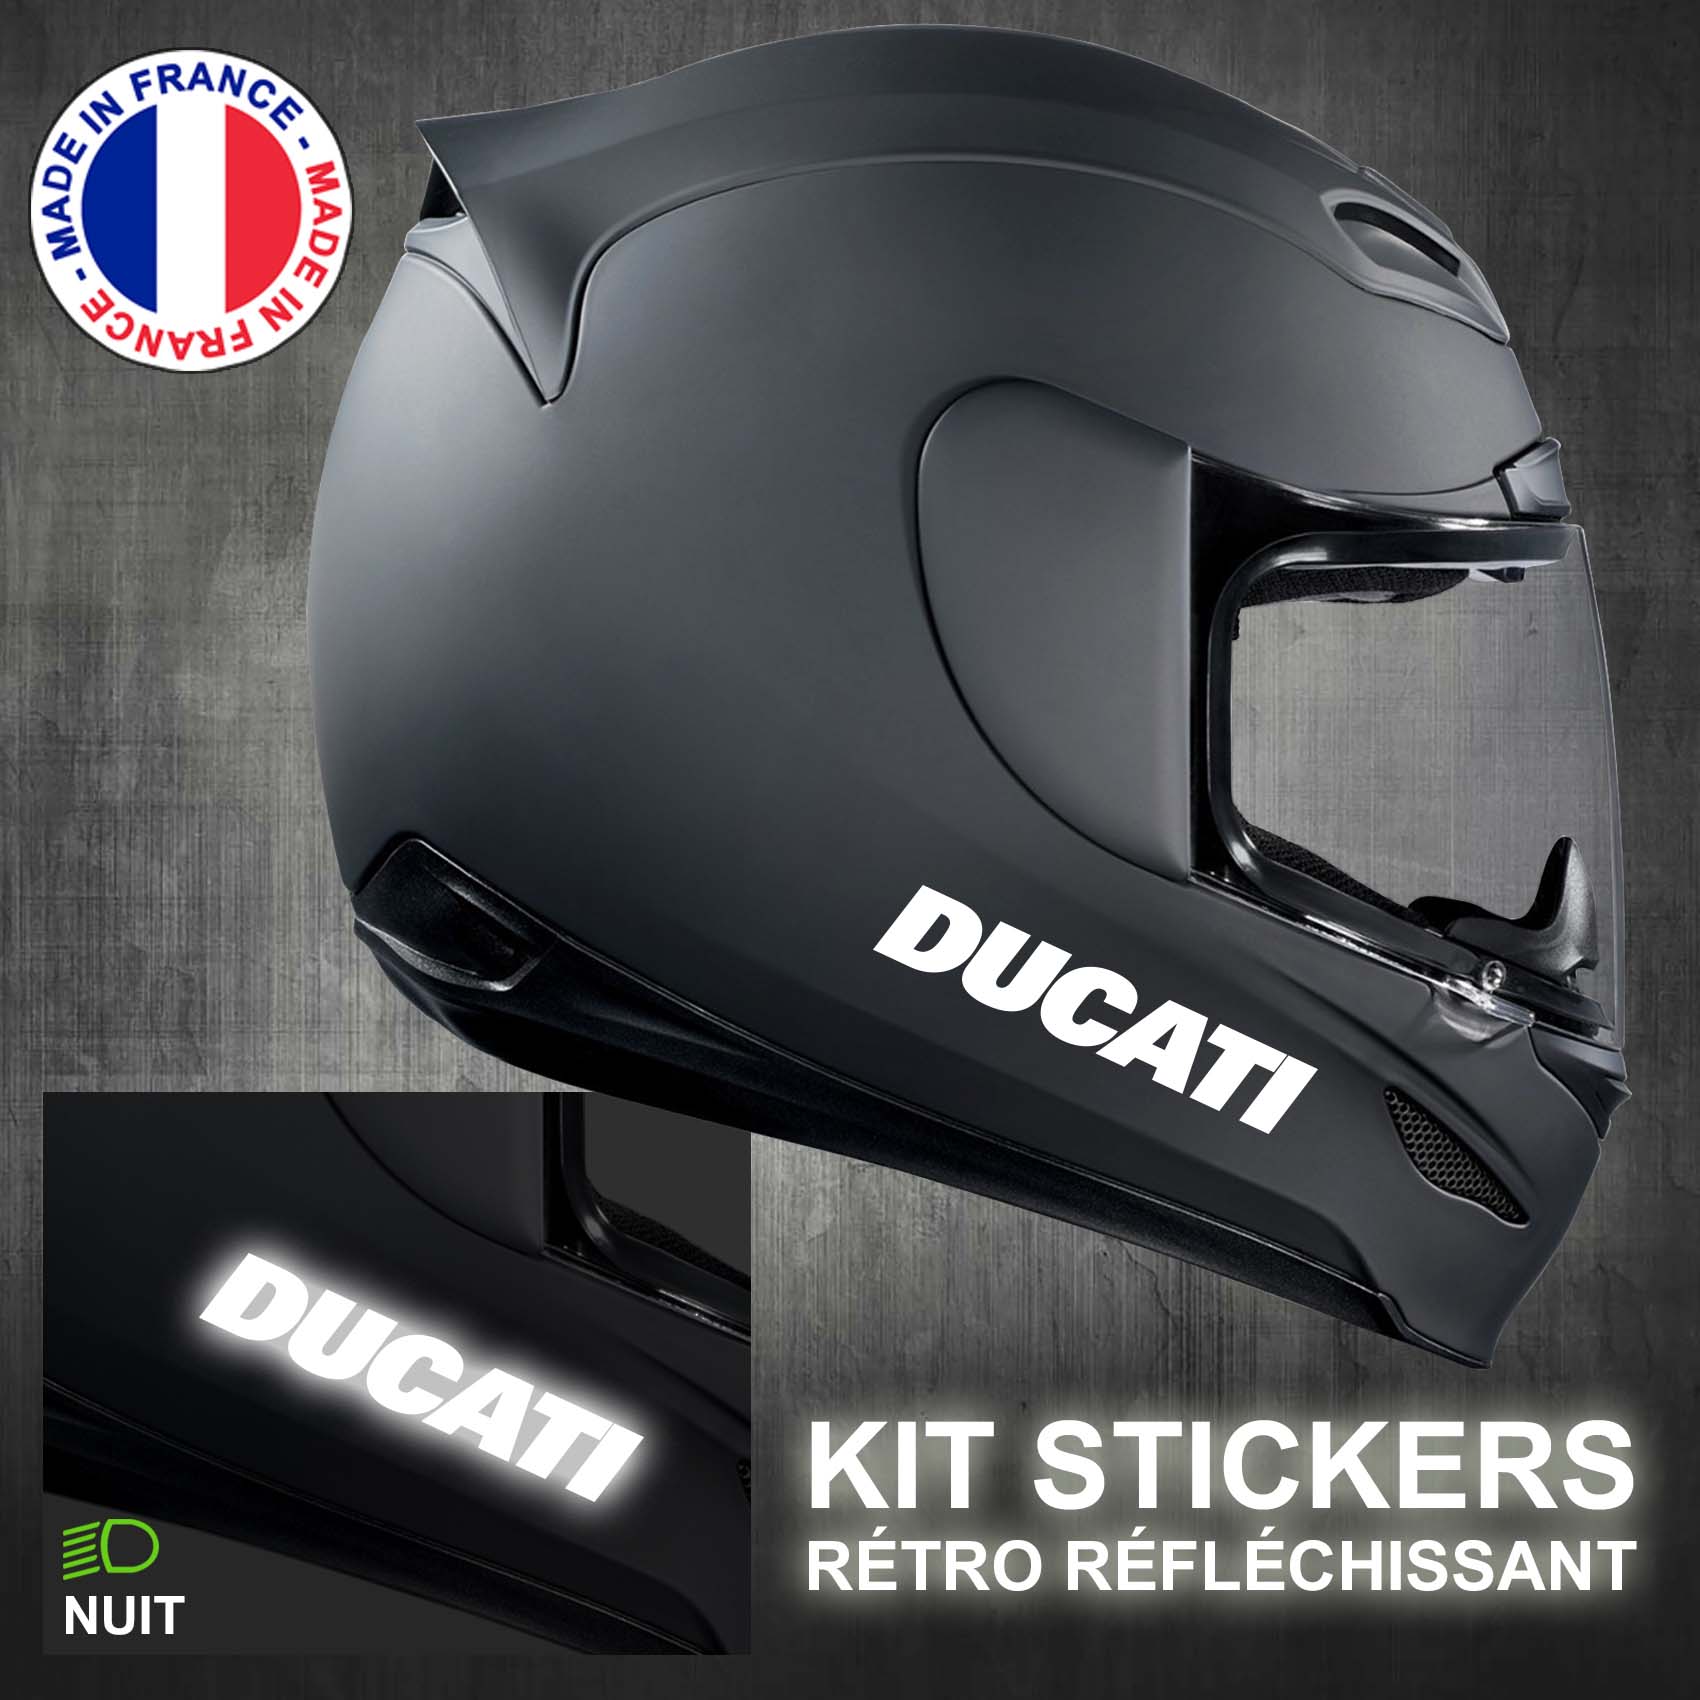 stickers-casque-moto-ducati-ref3-retro-reflechissant-autocollant-noir-moto-velo-tuning-racing-route-sticker-casques-adhesif-scooter-nuit-securite-decals-personnalise-personnalisable-min